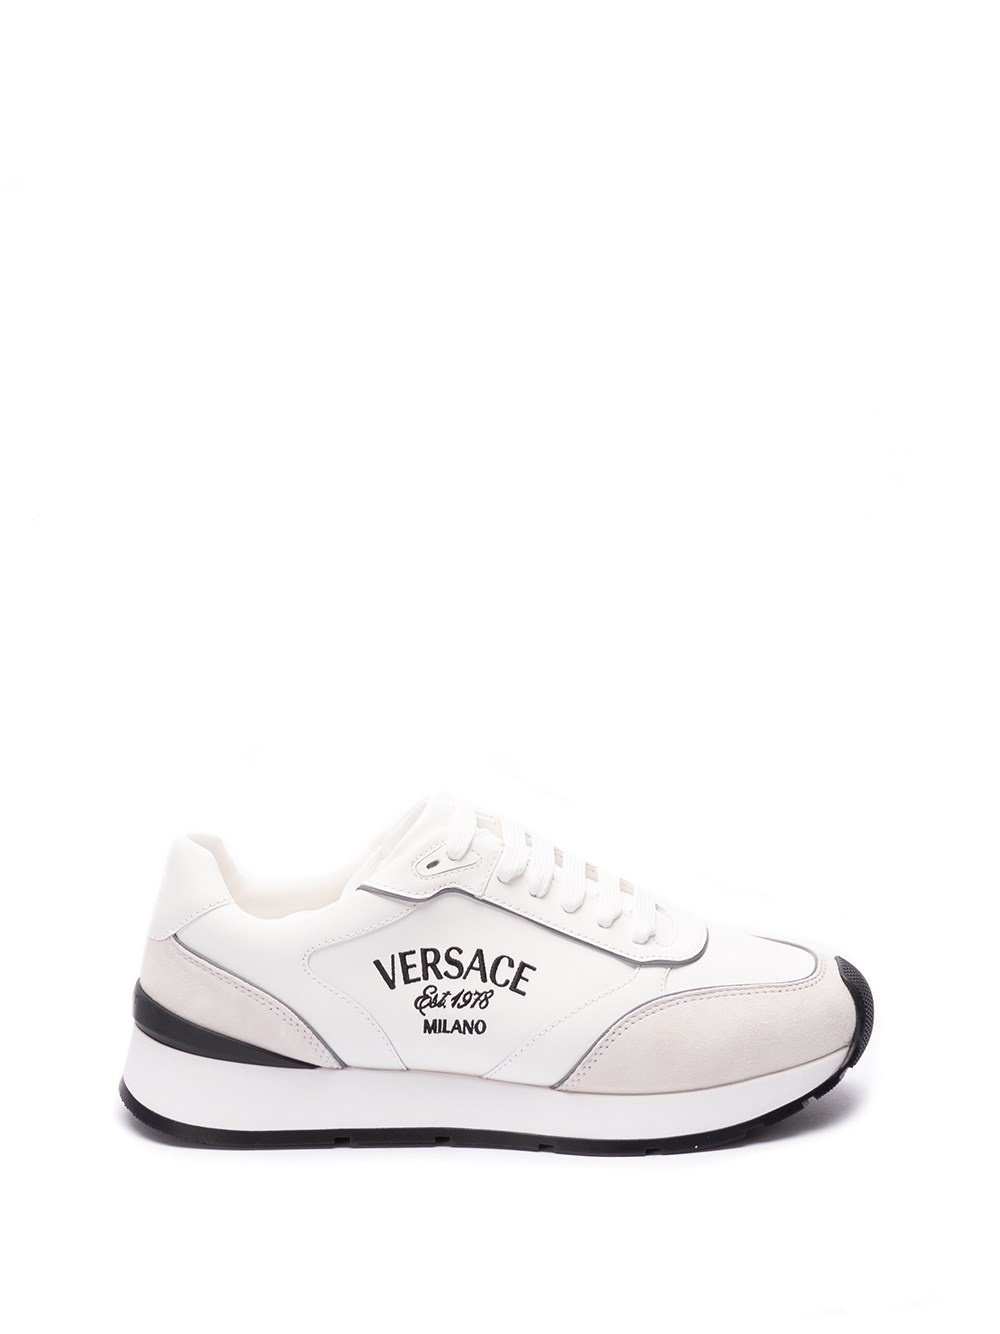 `Versace` Embroidery Sneakers - 1